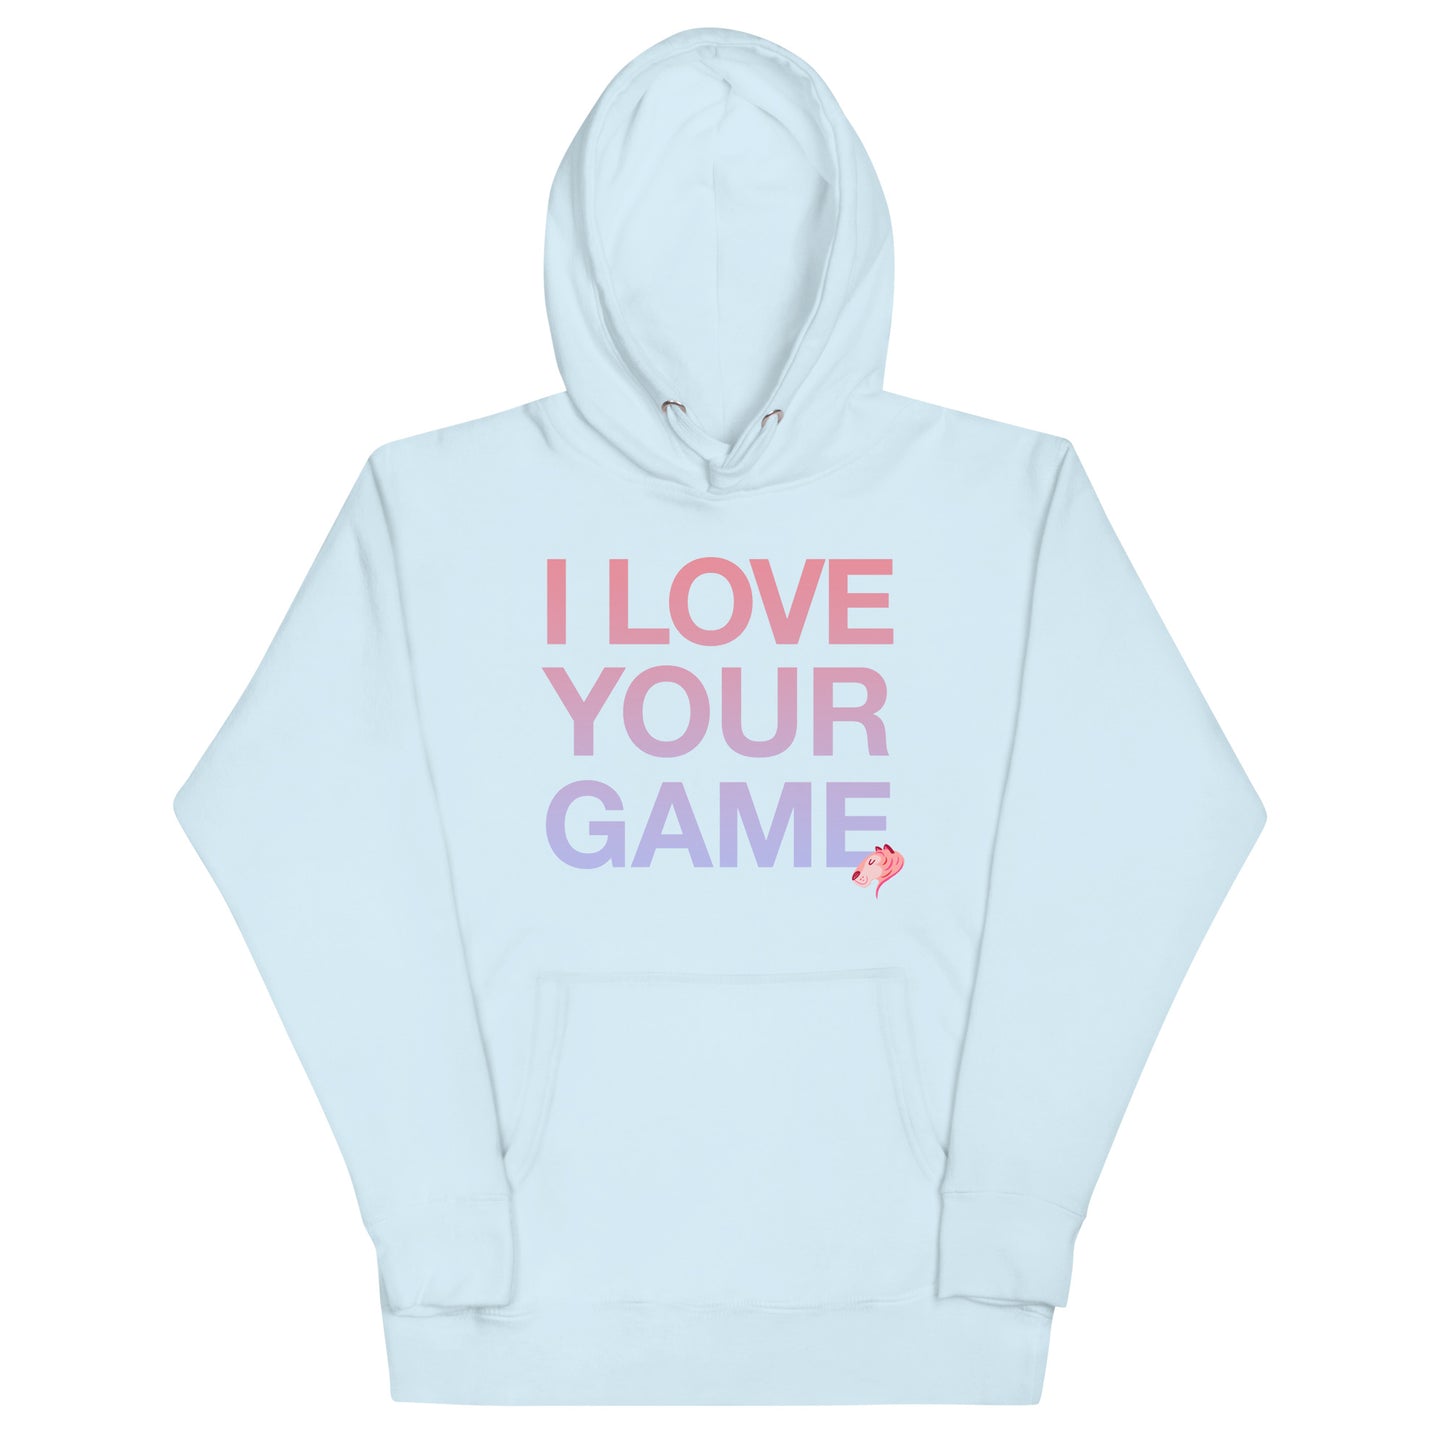 I LOVE YOUR GAME Unisex Hoodie